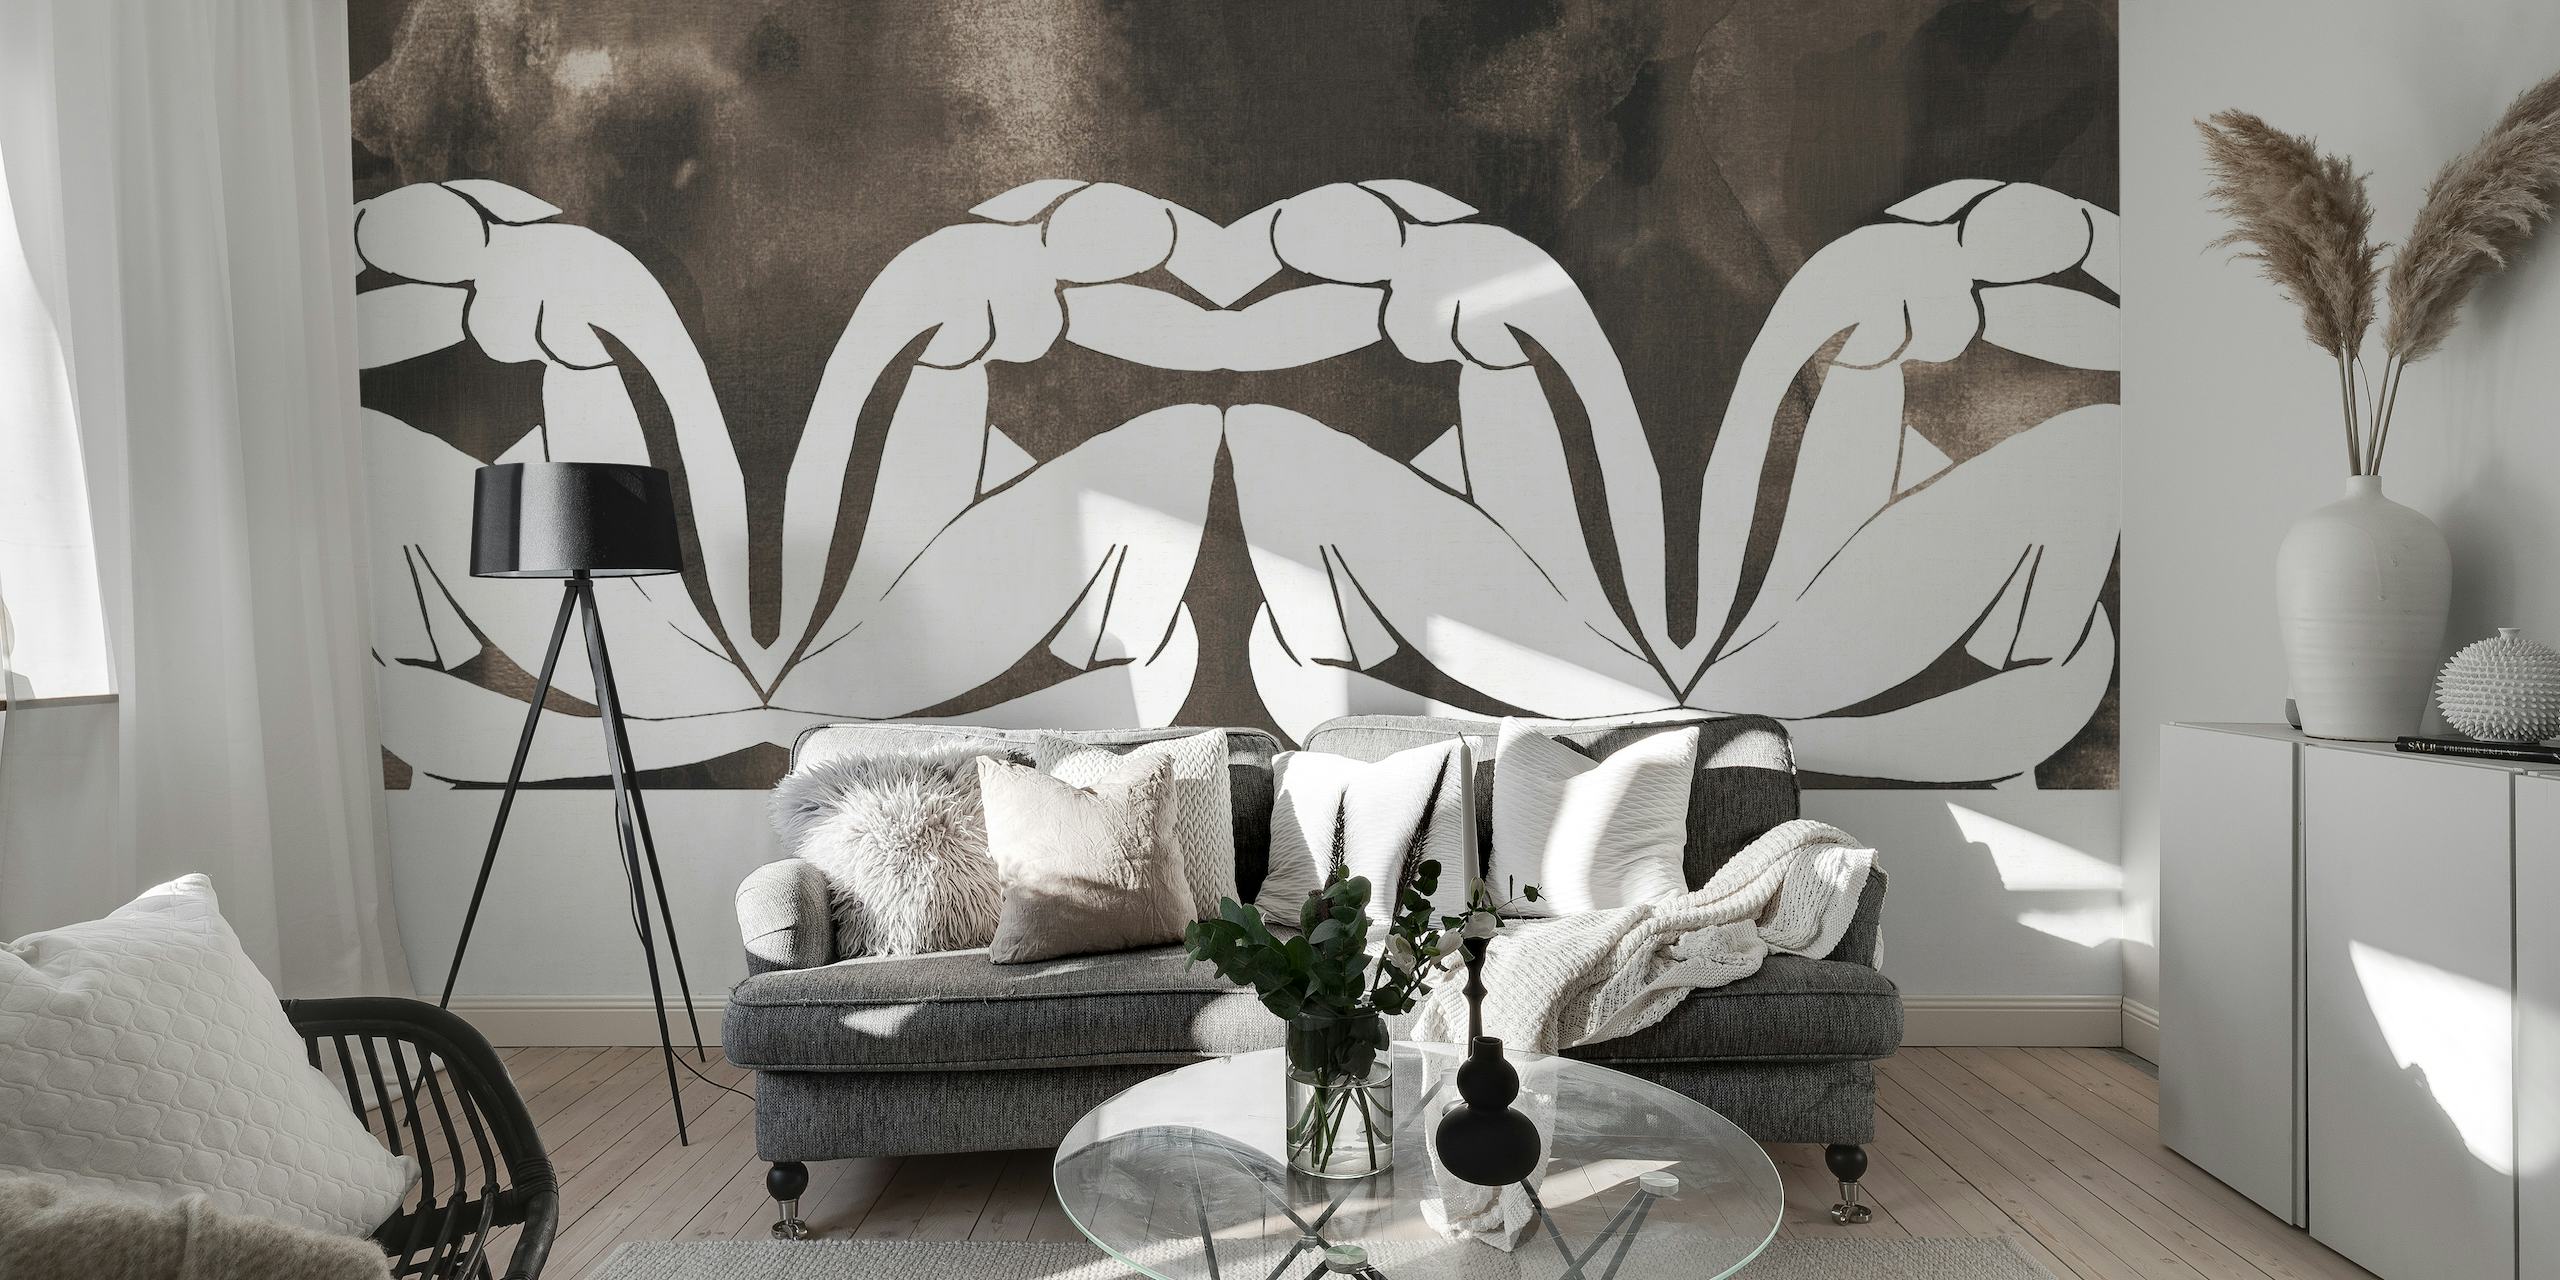 Matisse-inspired monochrome line drawing of intertwined sisterly figures wall mural